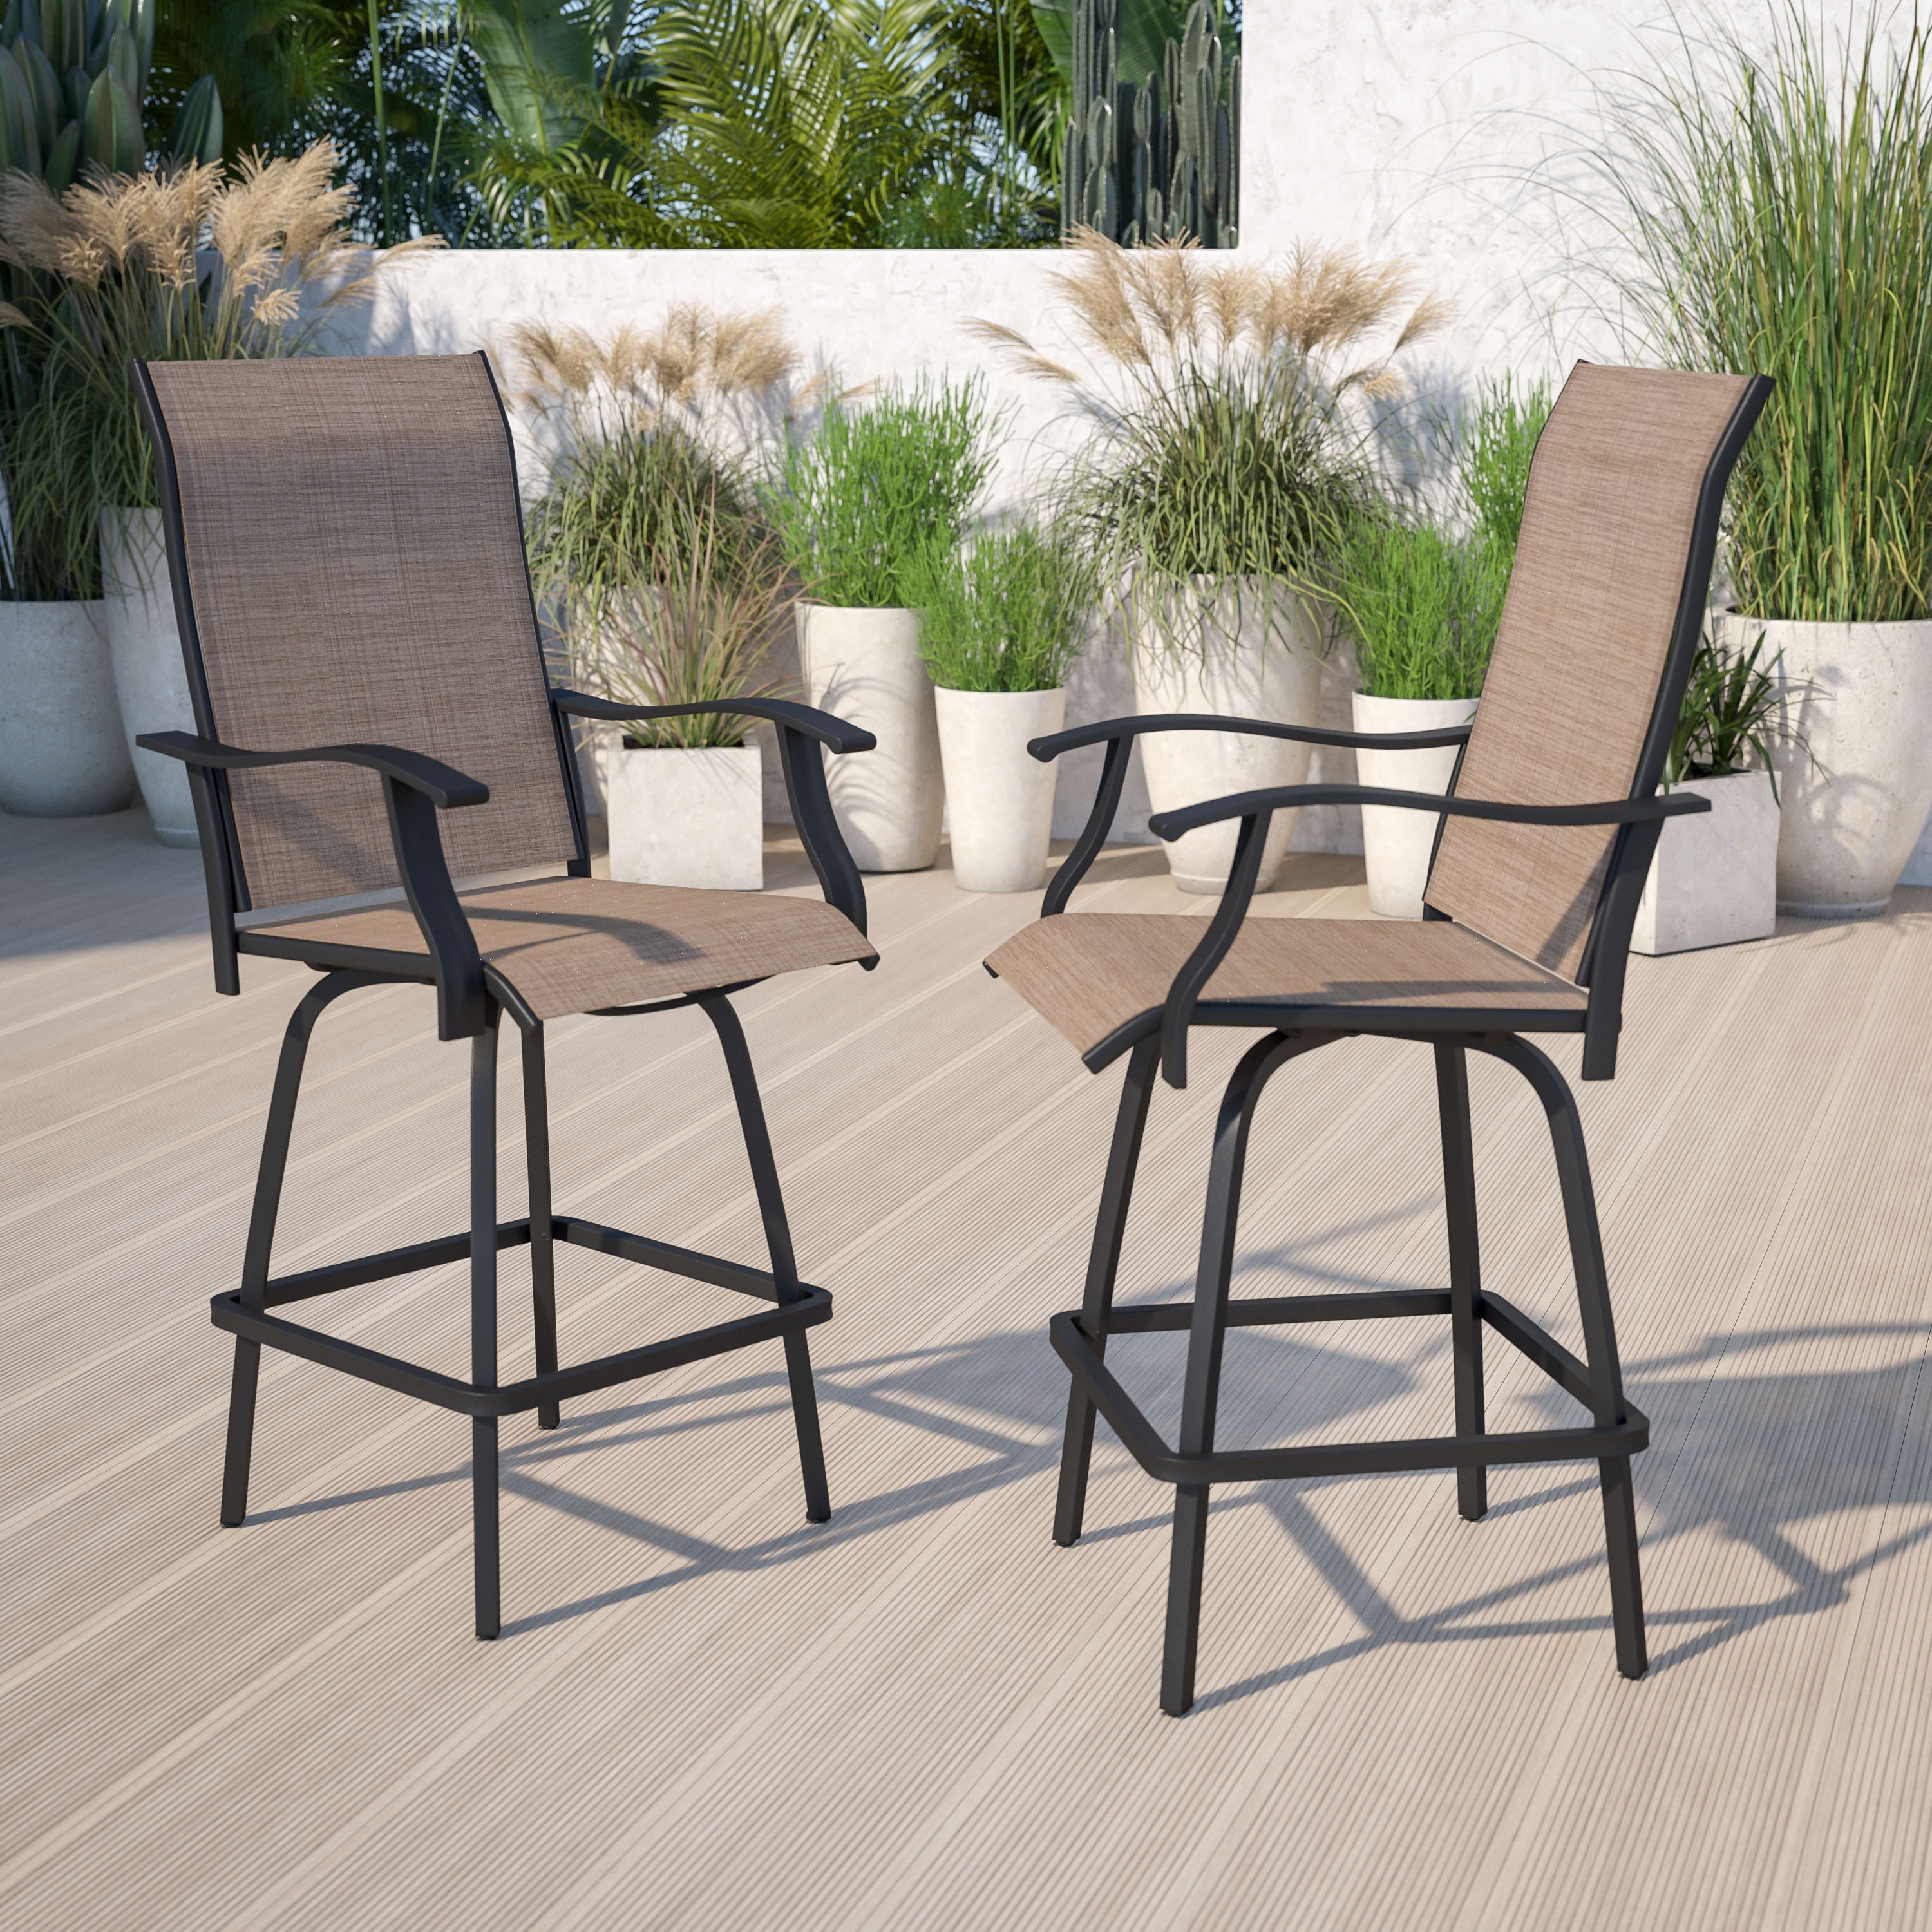 Sophia & William Swivel Bar Stool 4 Pcs Patio Bar Chairs All Weather Furniture Set Patio Bar Chairs High Back with Breathable Textilene 